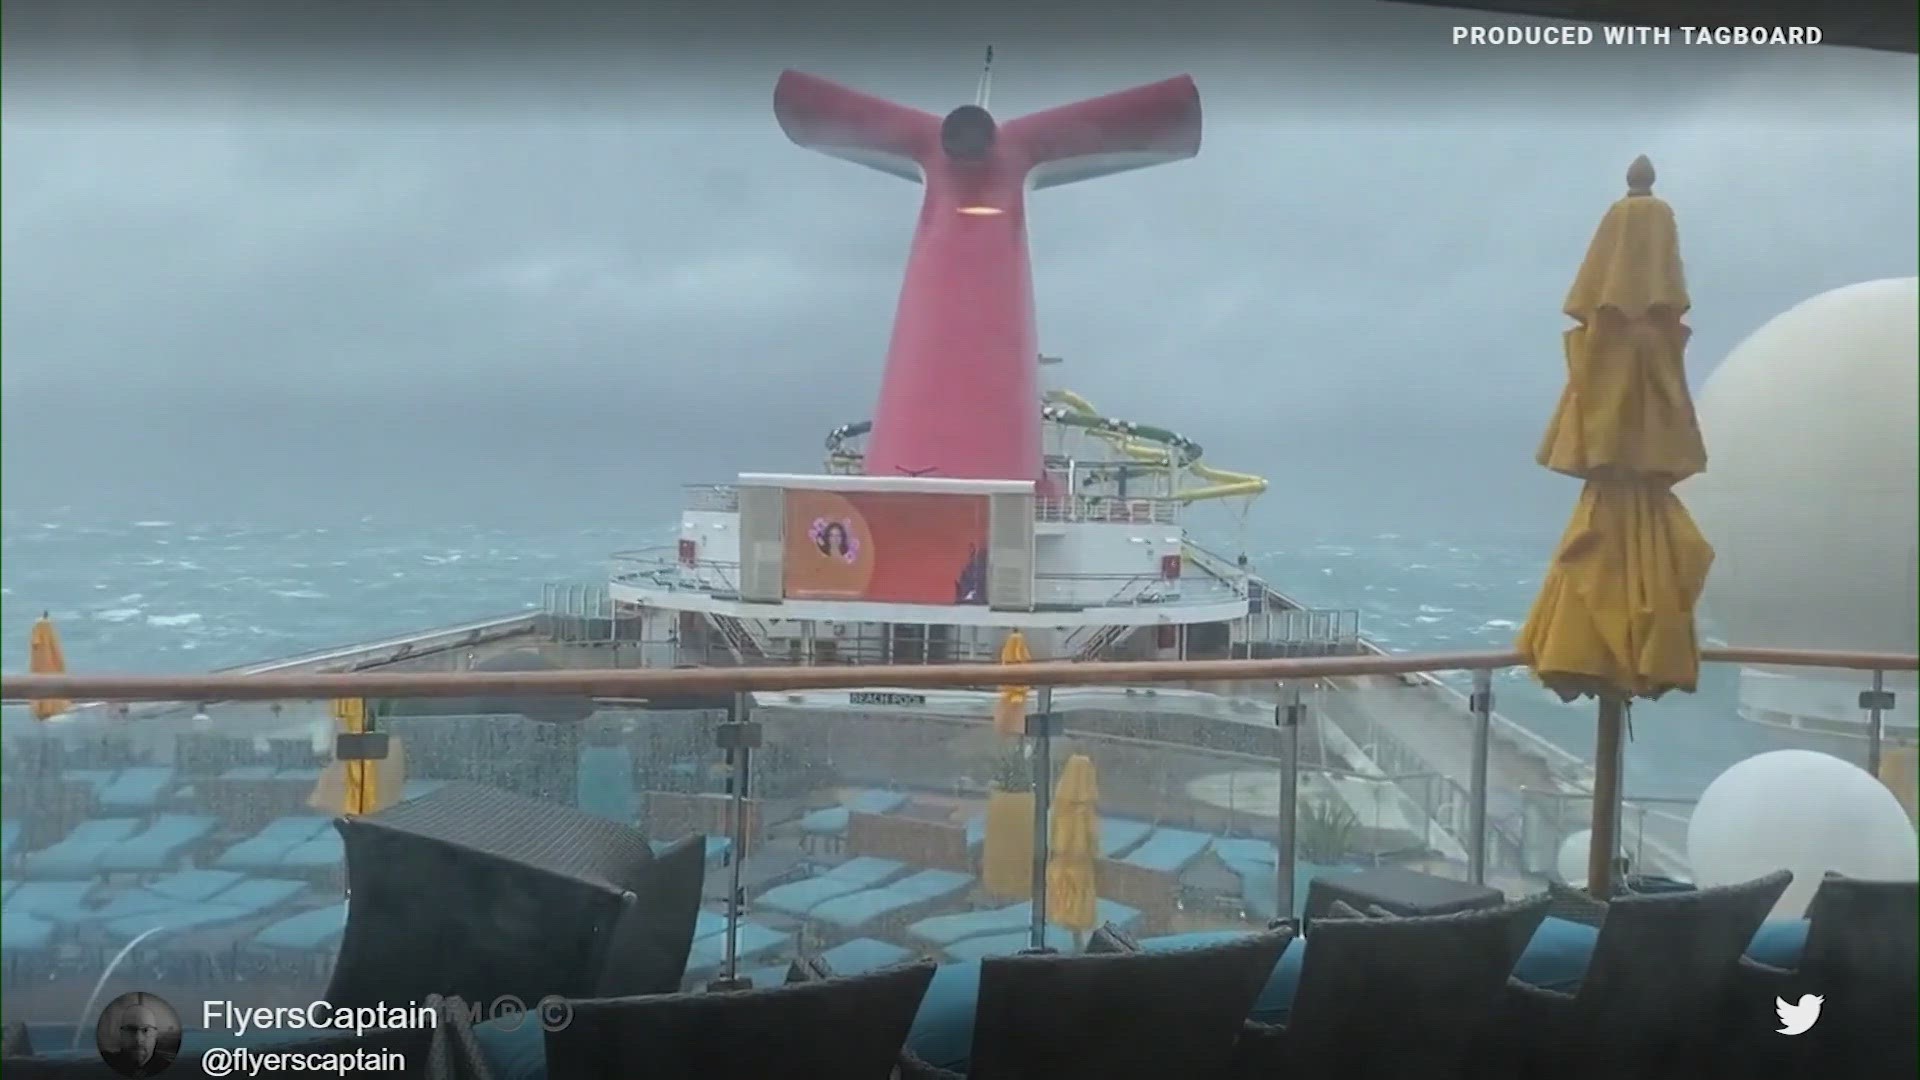 New video shows a Carnival Cruise that ended in chaos off the East Coast this weekend.